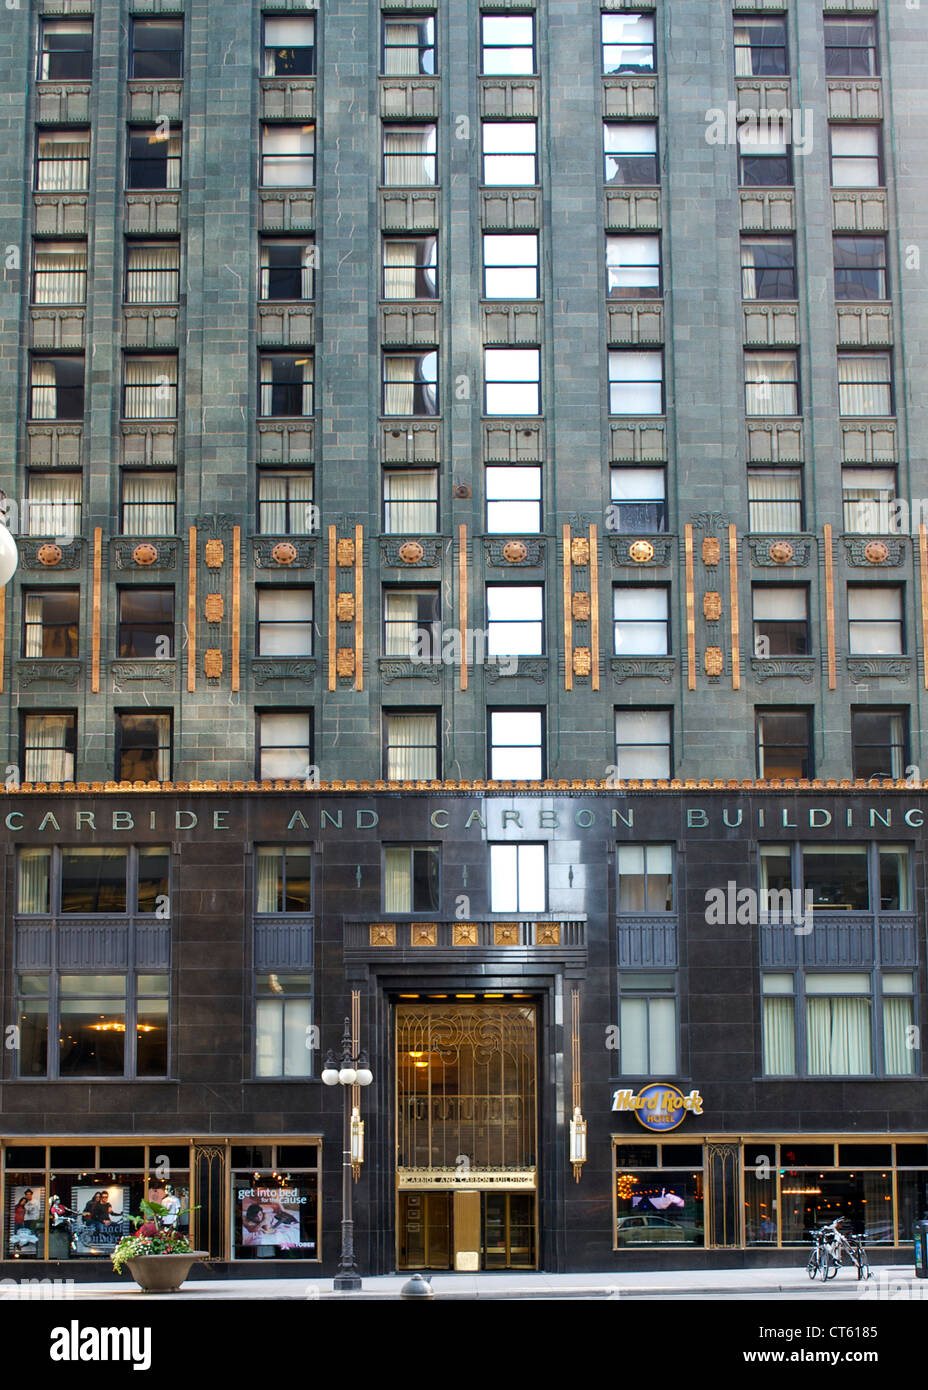 Carbide and Carbon Building in Chicago, Illinois, USA. Stock Photo